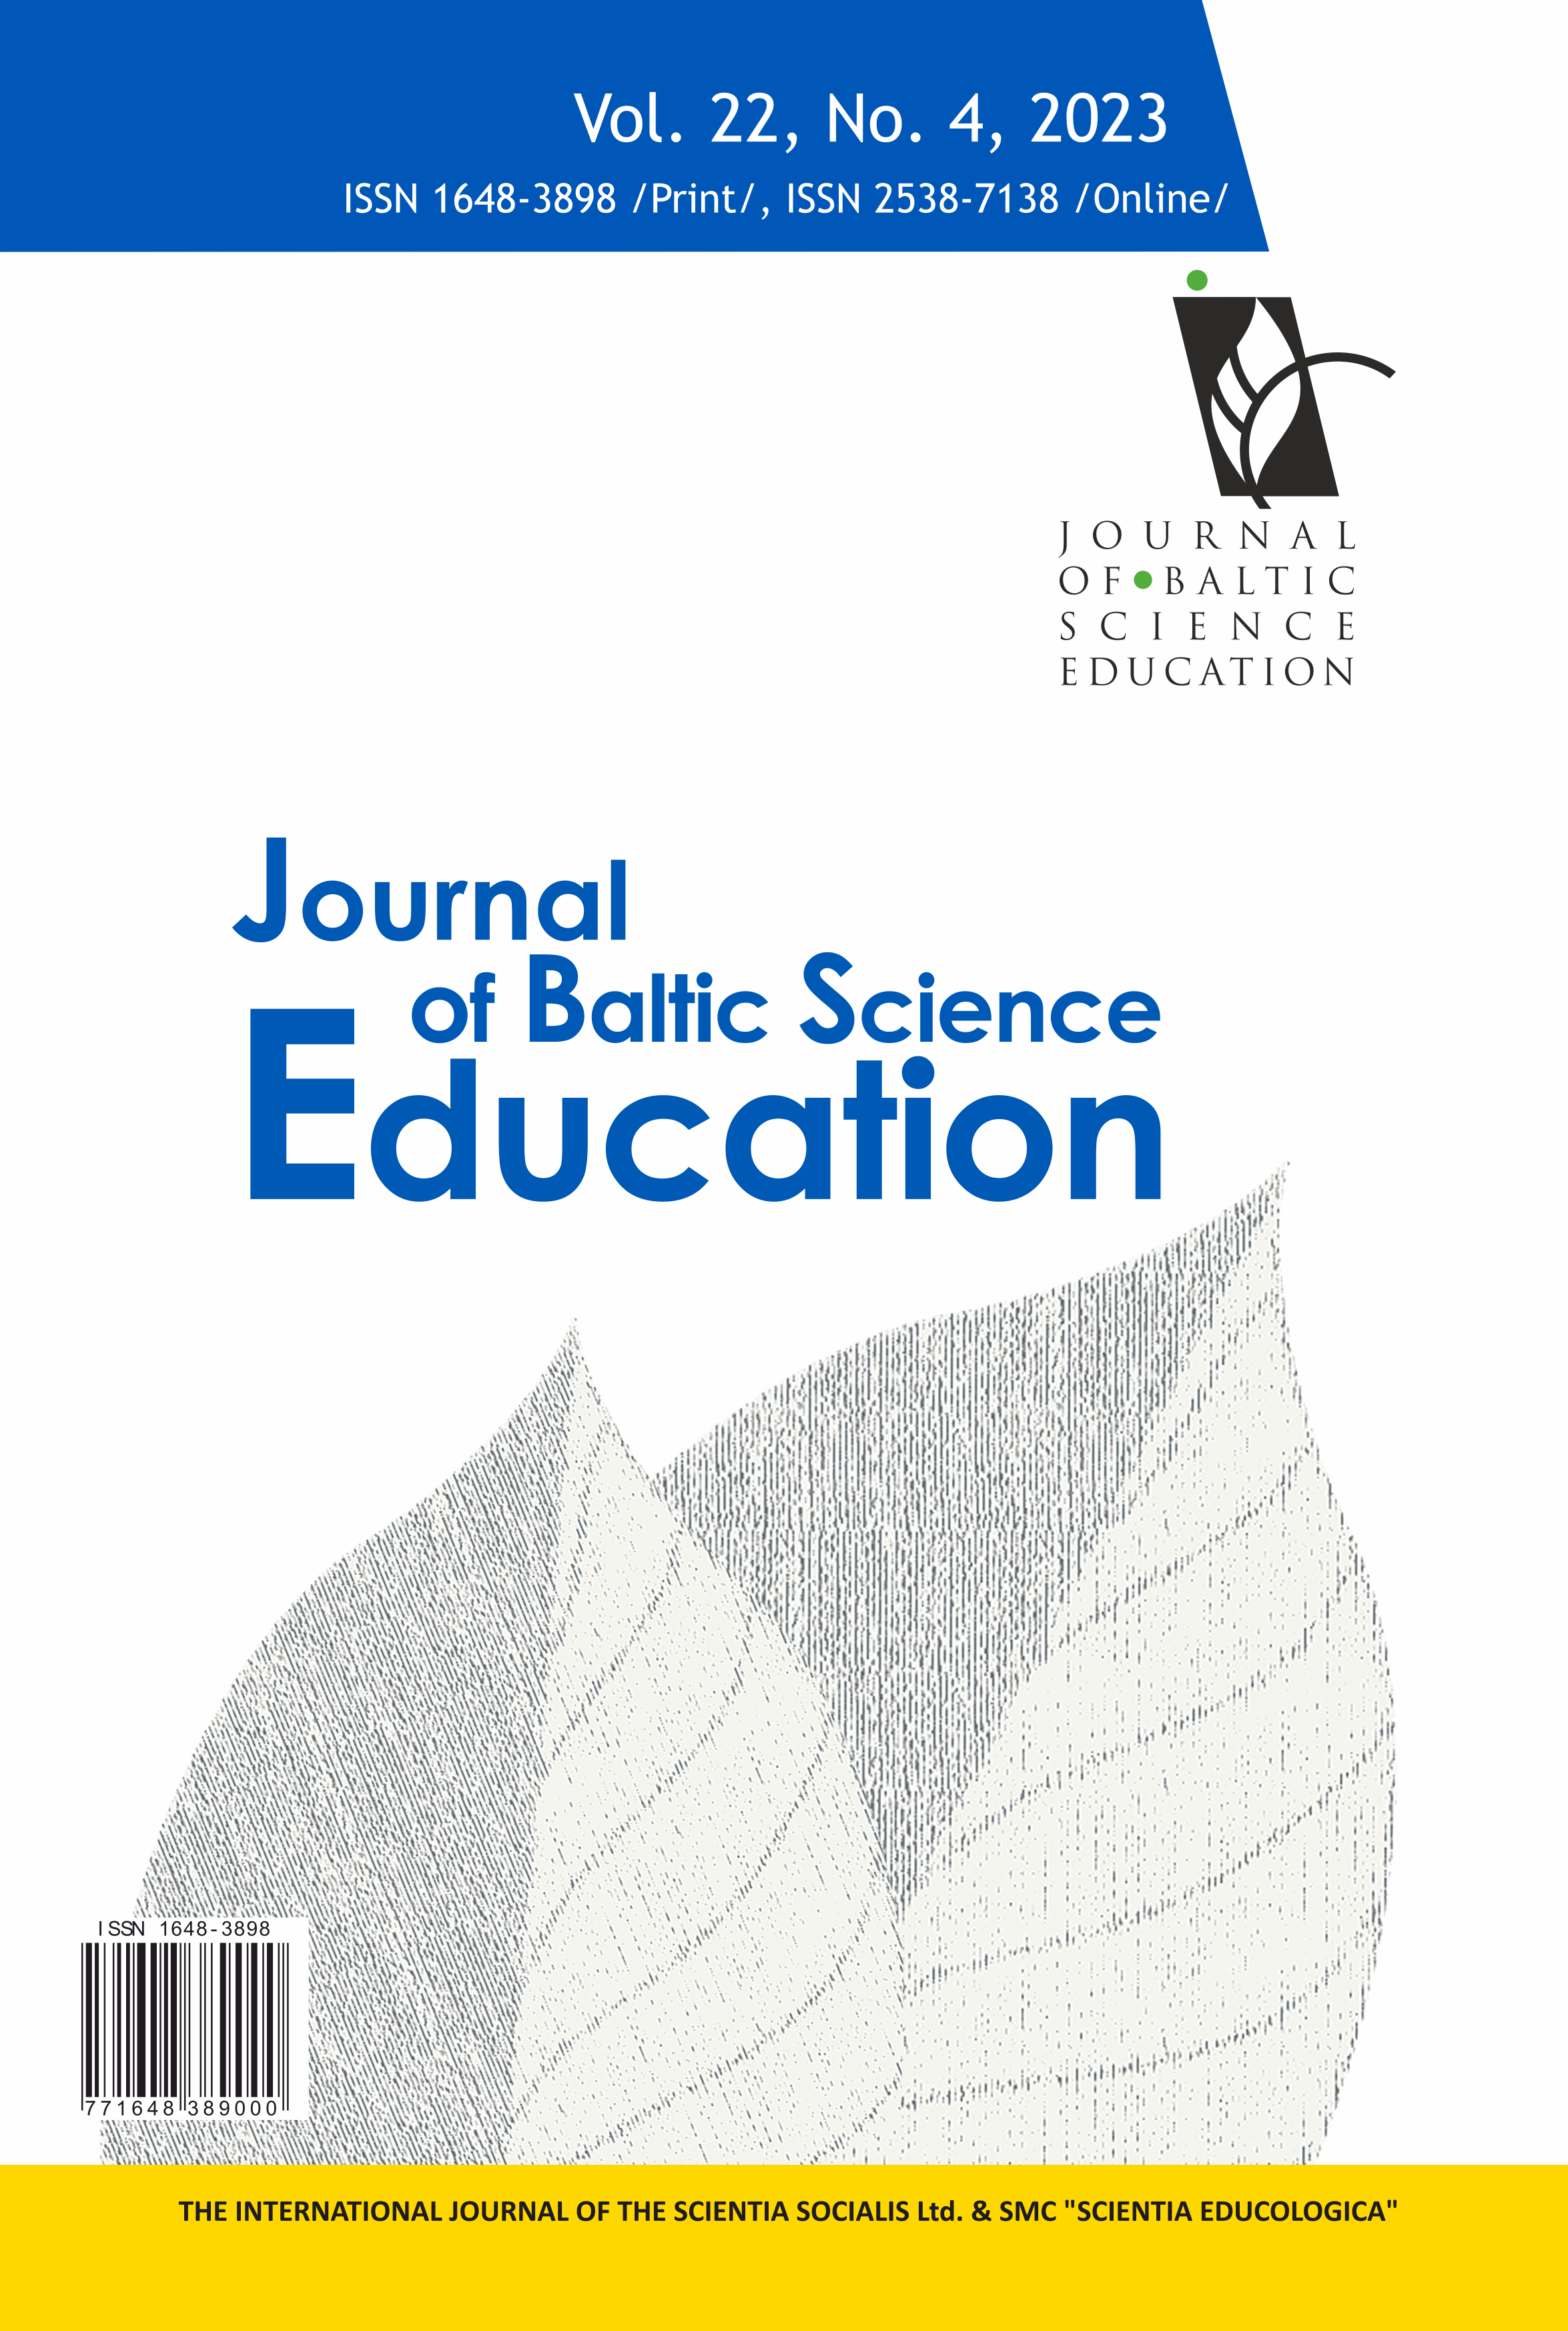 THE EFFECTS OF EXTENDED REALITY TECHNOLOGIES IN STEM EDUCATION ON STUDENTS’ LEARNING RESPONSE AND PERFORMANCE Cover Image